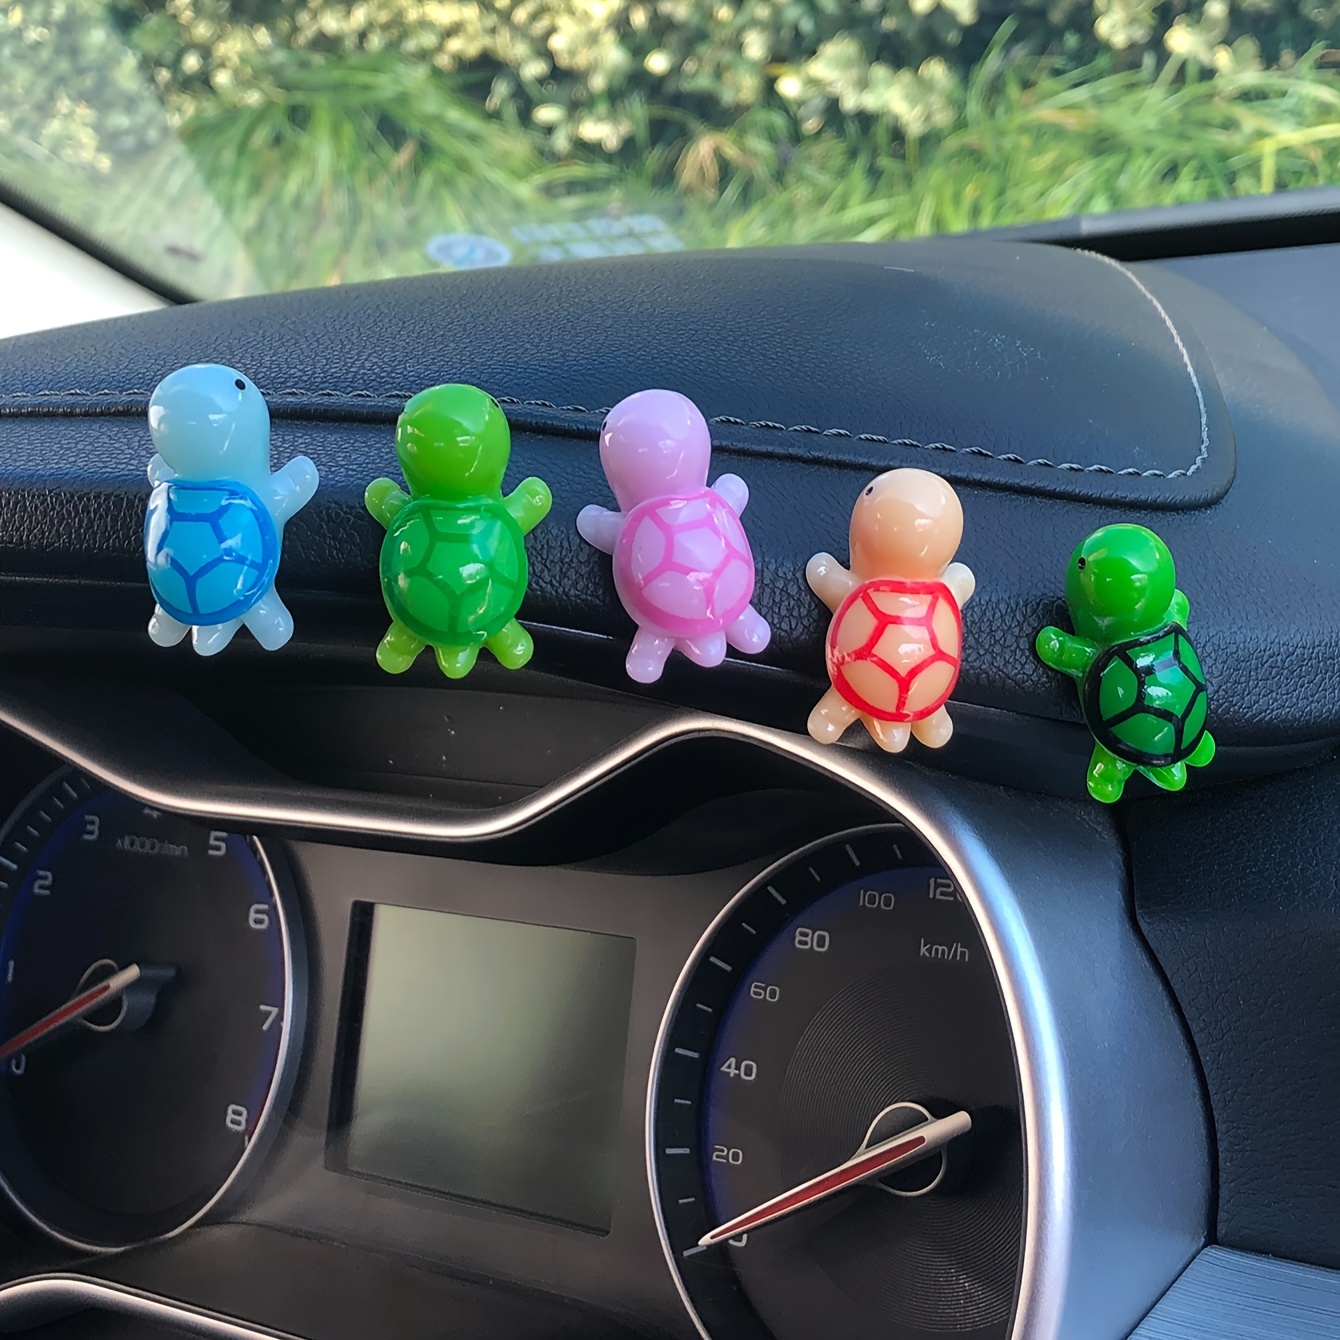 

5pcs Turtle Dashboard Decorations - Resin Car Interior Ornaments, Stylish Automotive Accessory, Ideal Gift For Turtle Enthusiasts